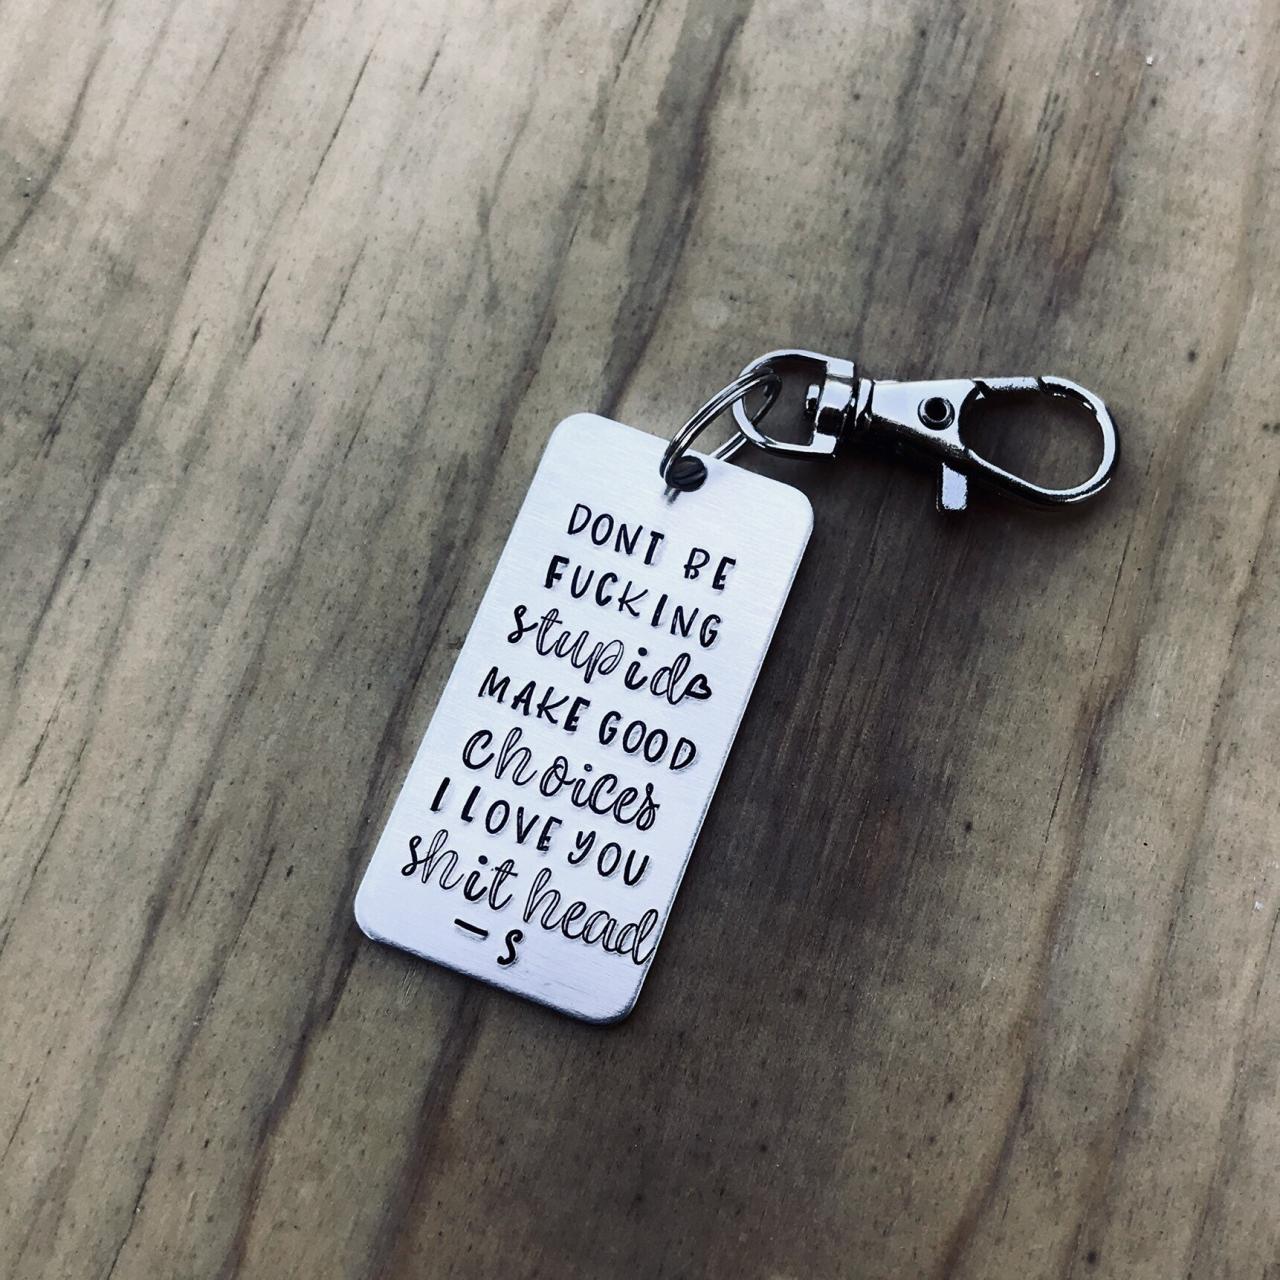 Shit Head Keychain, Funny, Cuss Words, Silver Color Metal, Lightweight Aluminum, Love, Thoughtful Gift, Shit Head